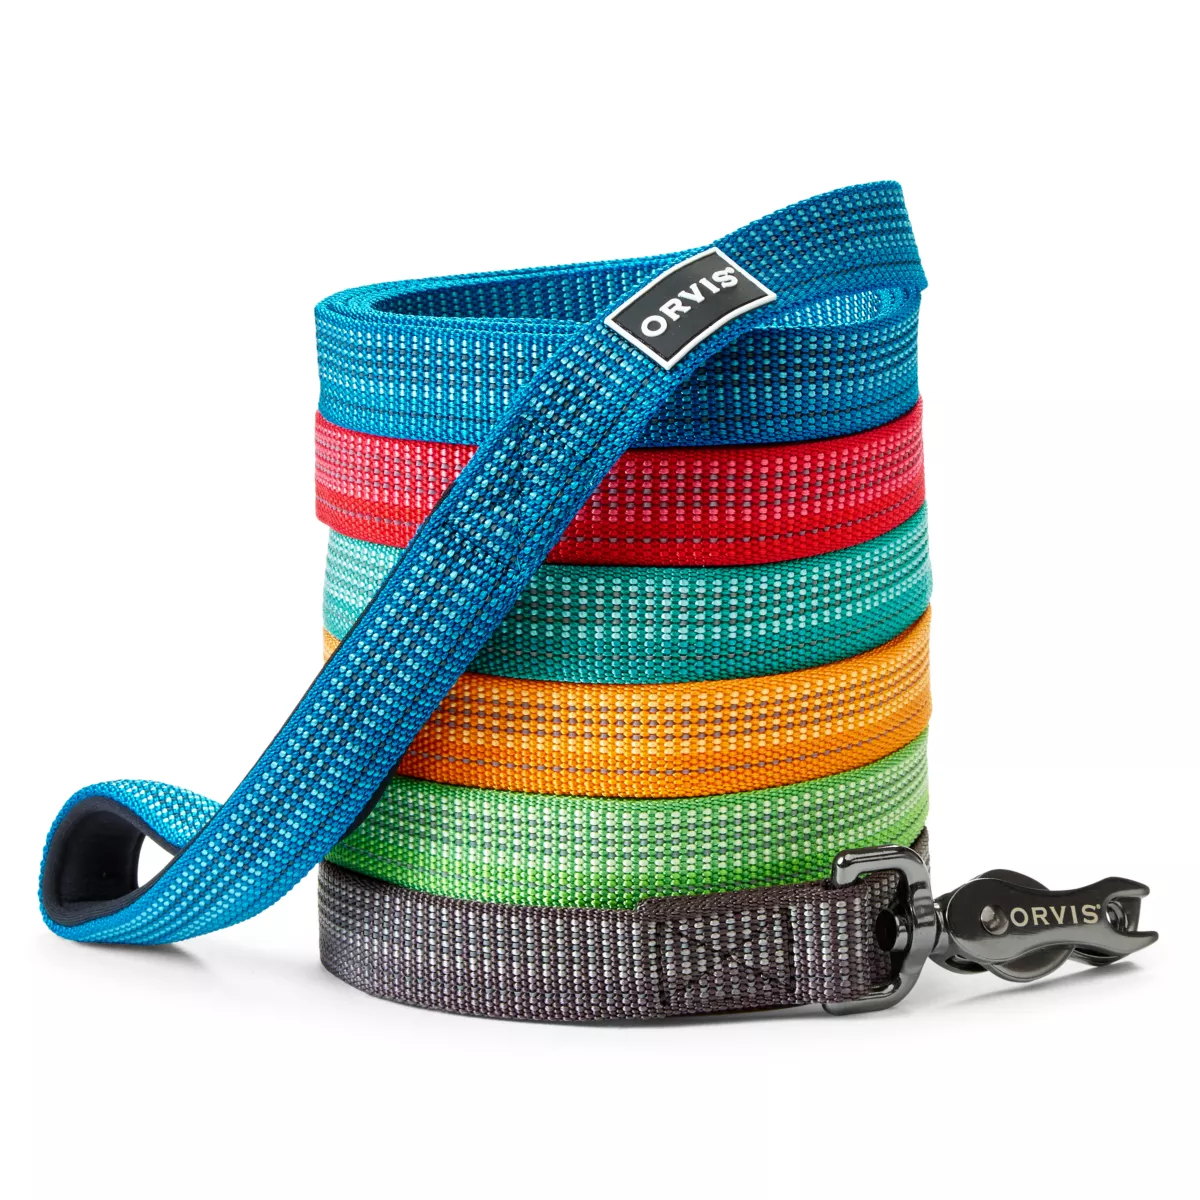 Understanding Safety Considerations When Using Retractable Dog Leashes